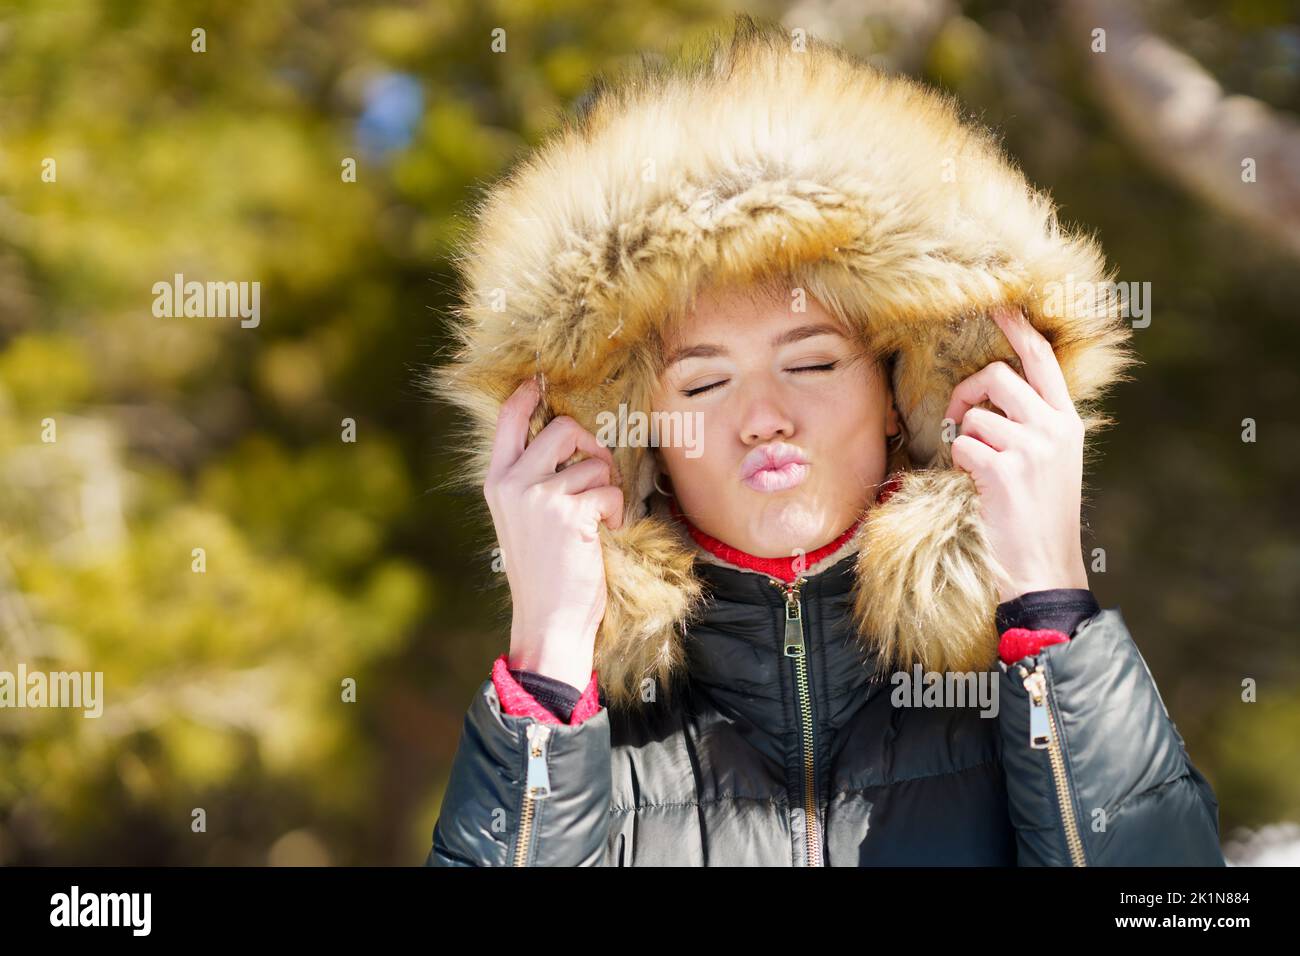 Young woman wearing a furry hooded jacket blowing a kiss in a forest. Stock Photo